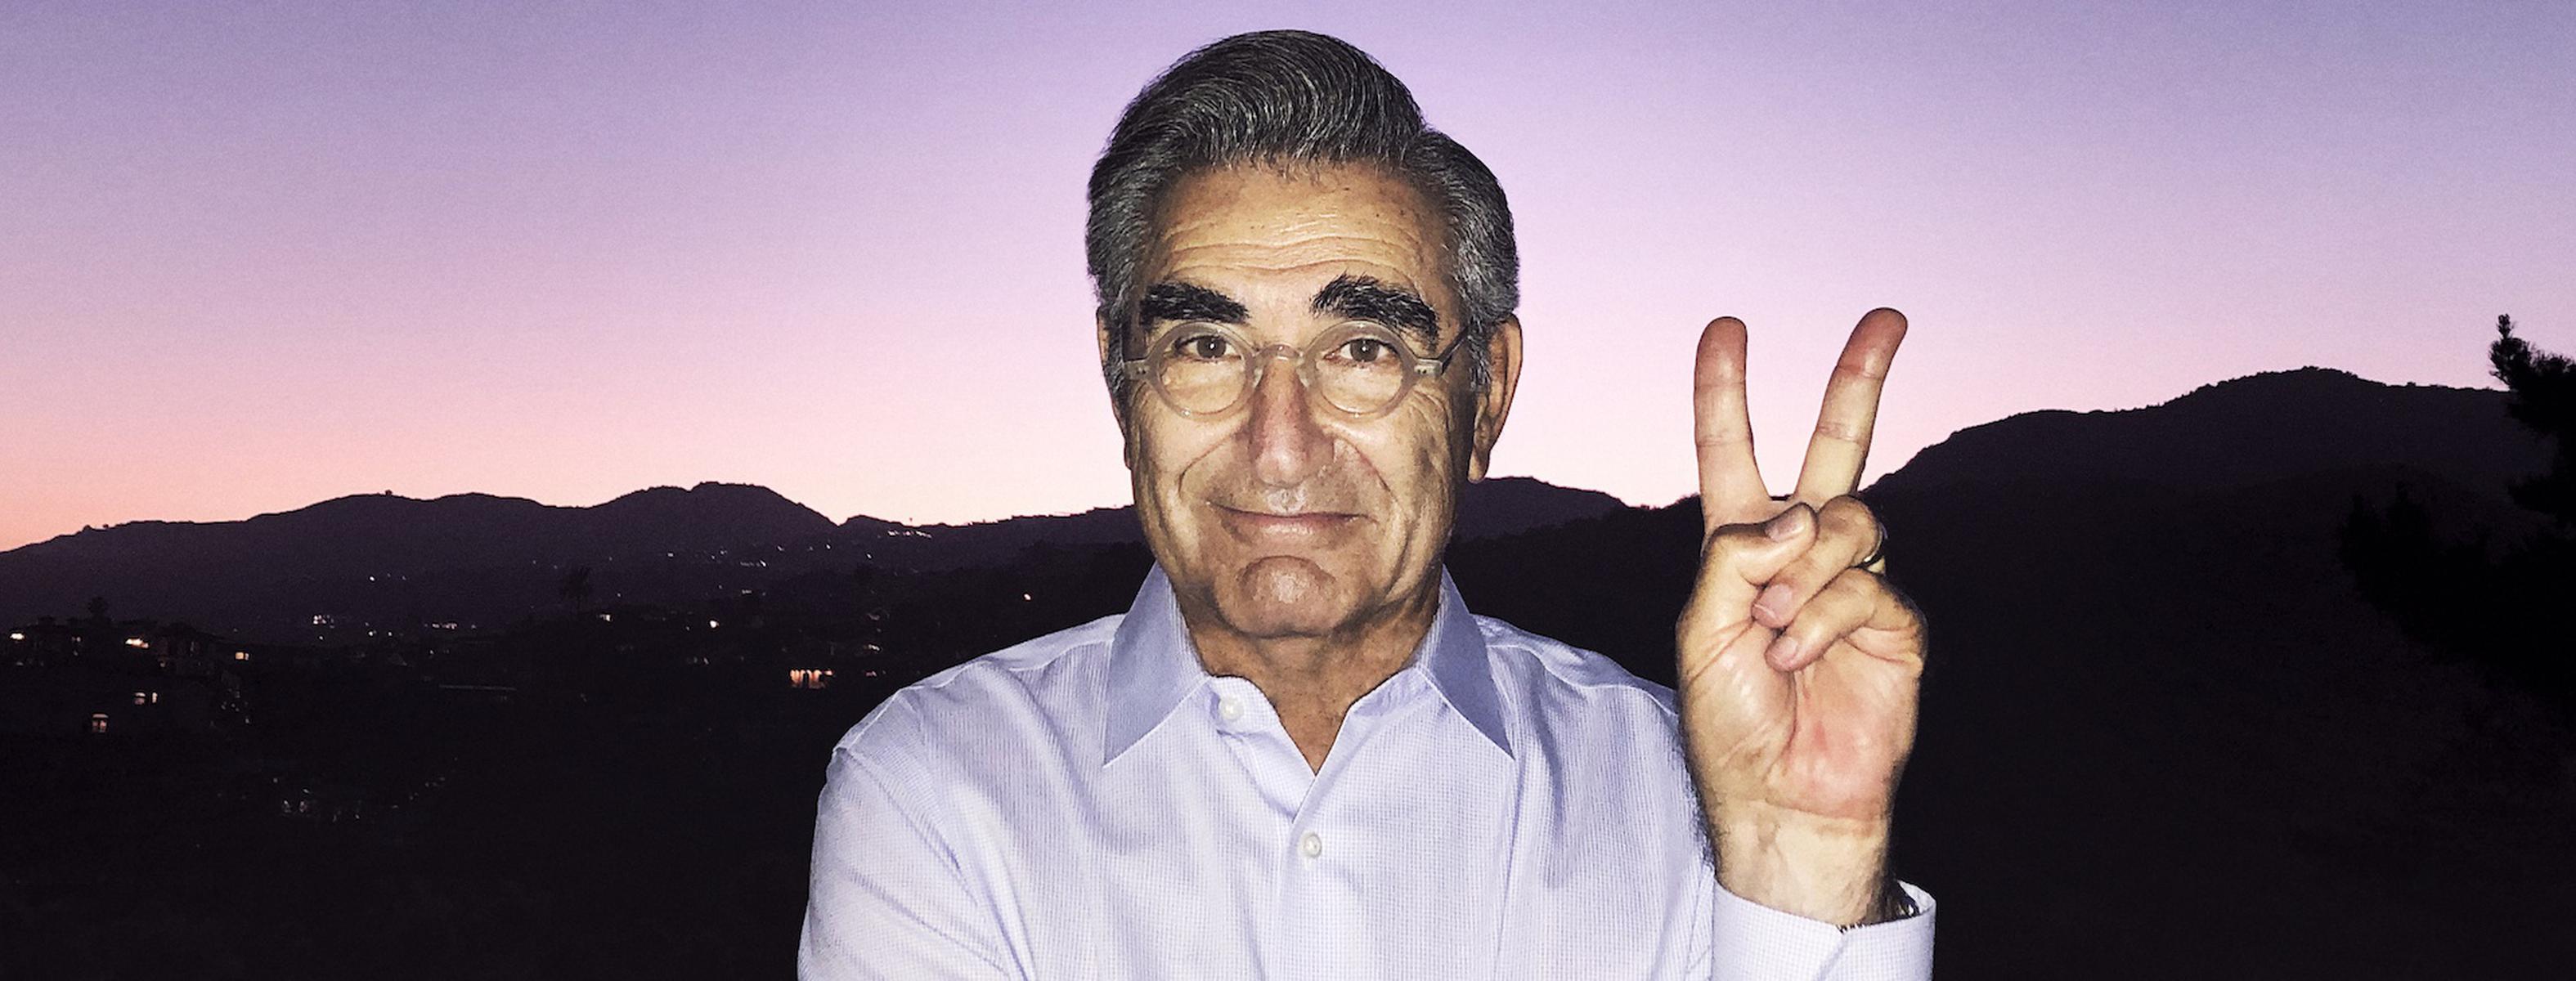 Eugene Levy Talks Comedy From Second City to Schitt's Creek